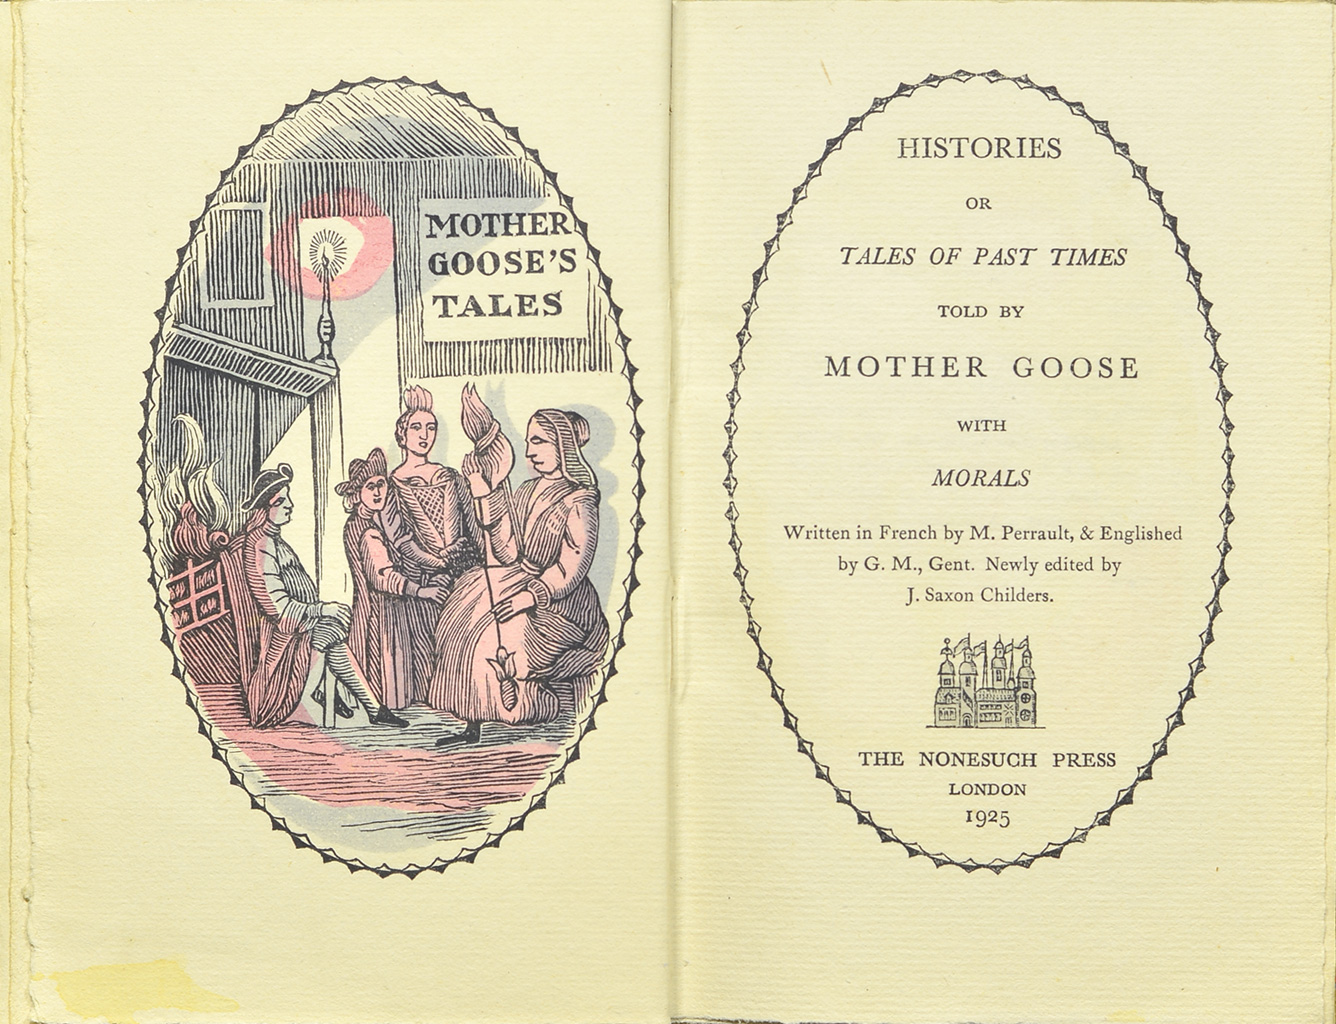 Exhibit Materials of Histories or tales of past times told by Mother Goose with morals